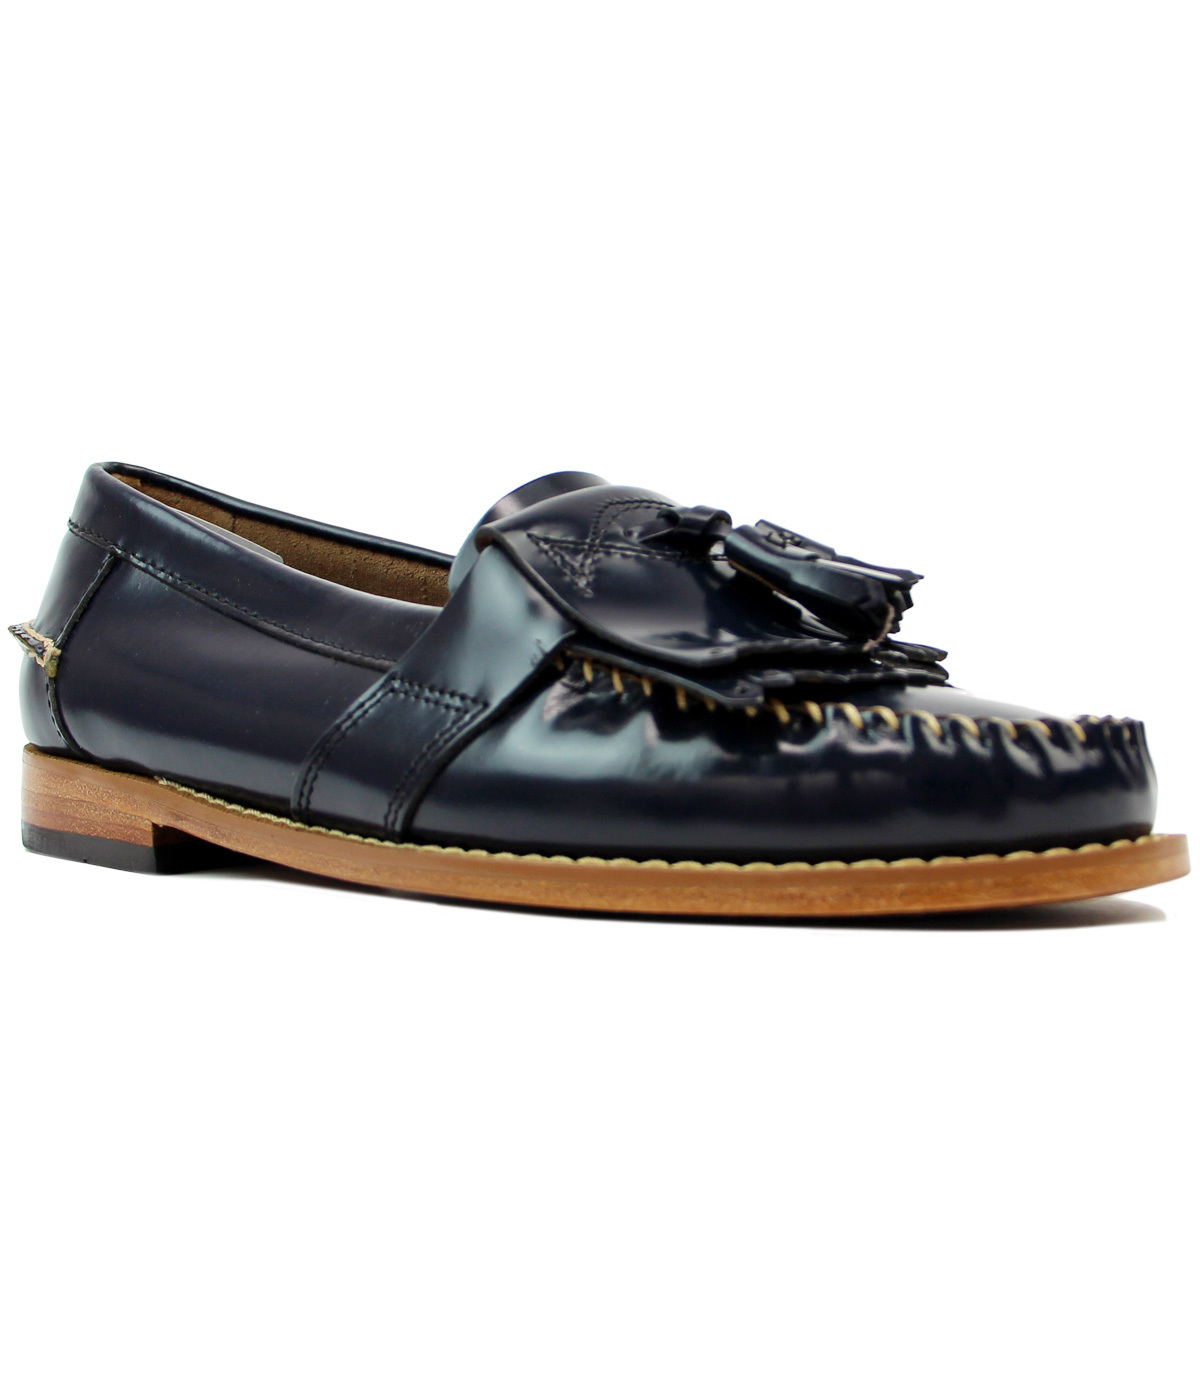 BASS WEEJUNS Elspeth Kiltie Retro Mod 60s Loafers in Navy